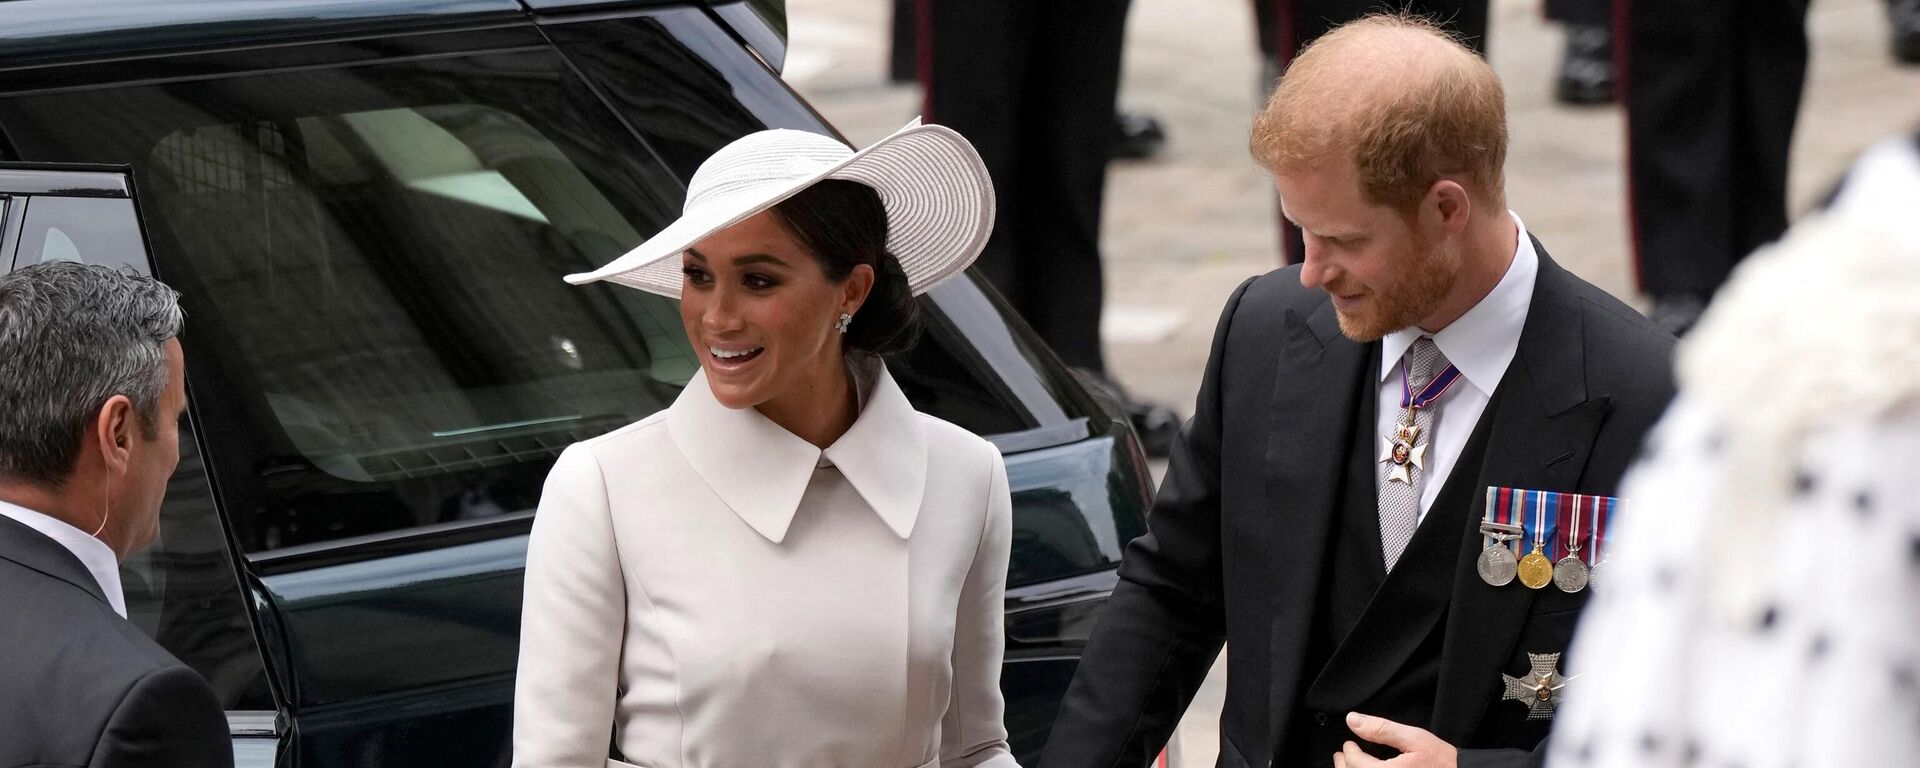 Britain's Prince Harry, Duke of Sussex, (R) and Britain's Meghan, Duchess of Sussex arrive to attend the National Service of Thanksgiving for The Queen's reign at Saint Paul's Cathedral in London on June 3, 2022 as part of Queen Elizabeth II's platinum jubilee celebrations. -  - Sputnik International, 1920, 03.06.2022